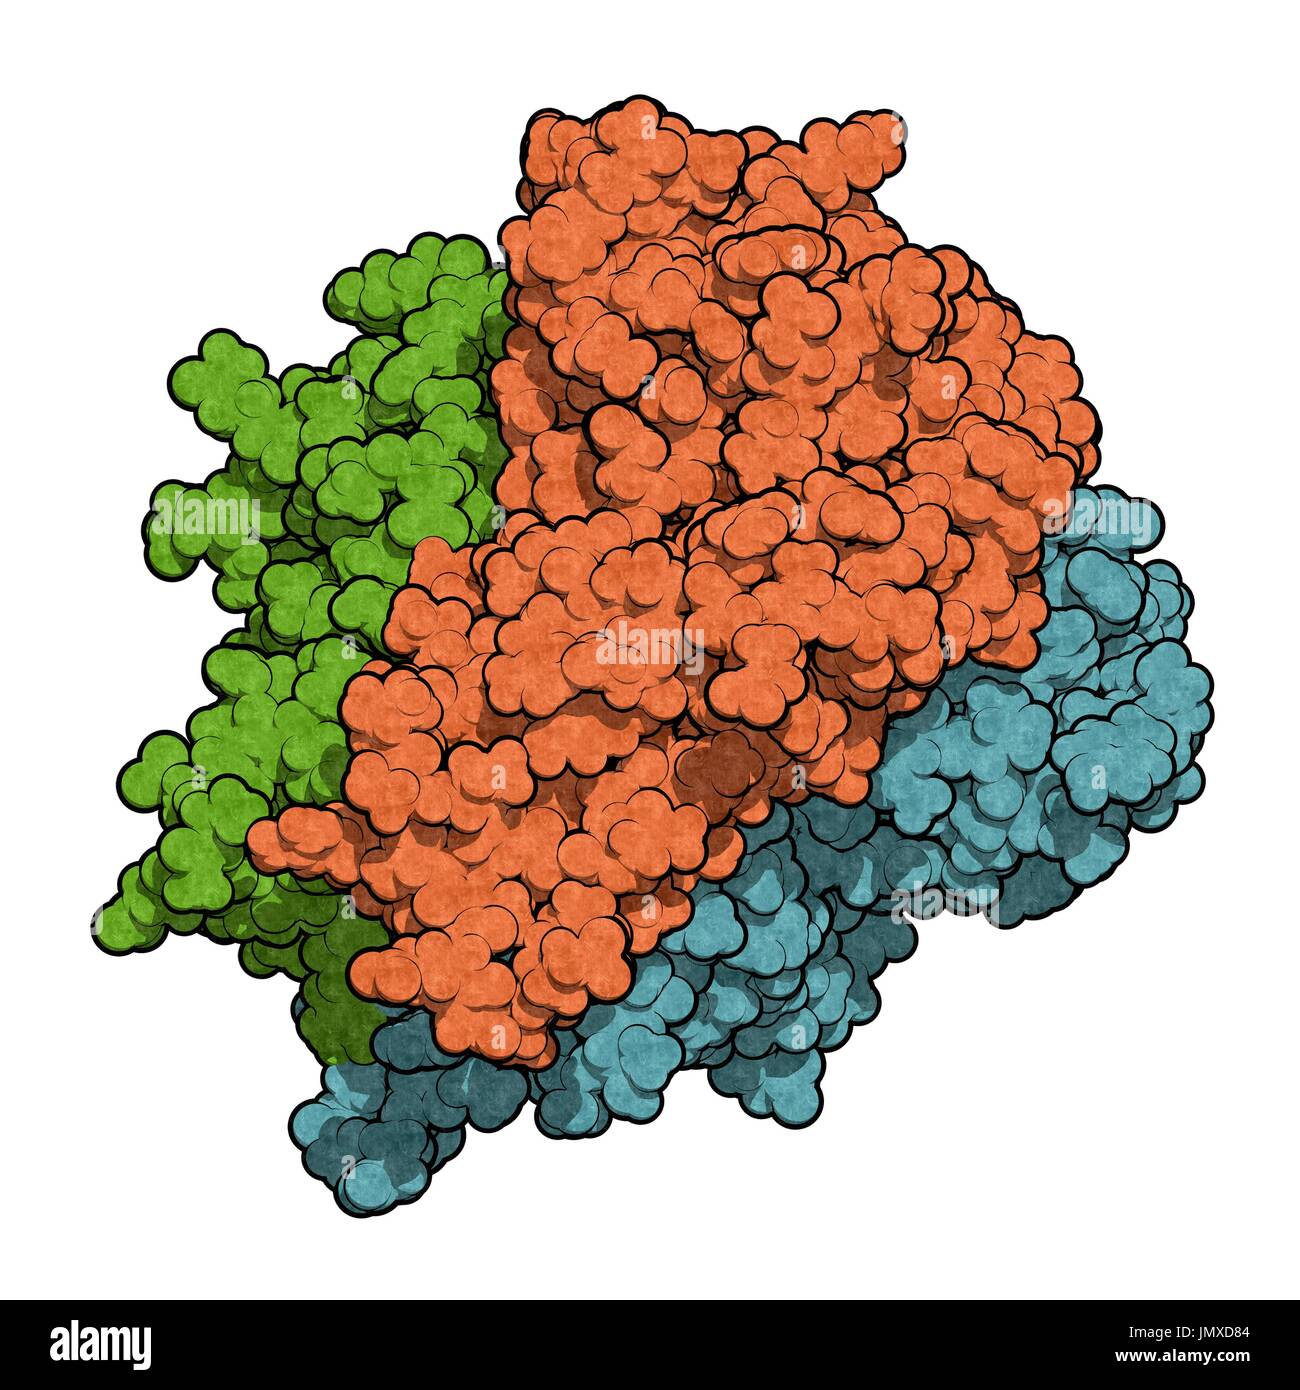 Tumour necrosis factor alpha (TNF) cytokine protein molecule. Clinically used inhibitors include infliximab, adalimumab, certolizumab and etanercept and are used to treat diseases such as Crohn's disease, psoriasis and rheumatoid arthritis. Space-filling model. Chains (monomers of the trimer) shown in different colours. Stock Photo